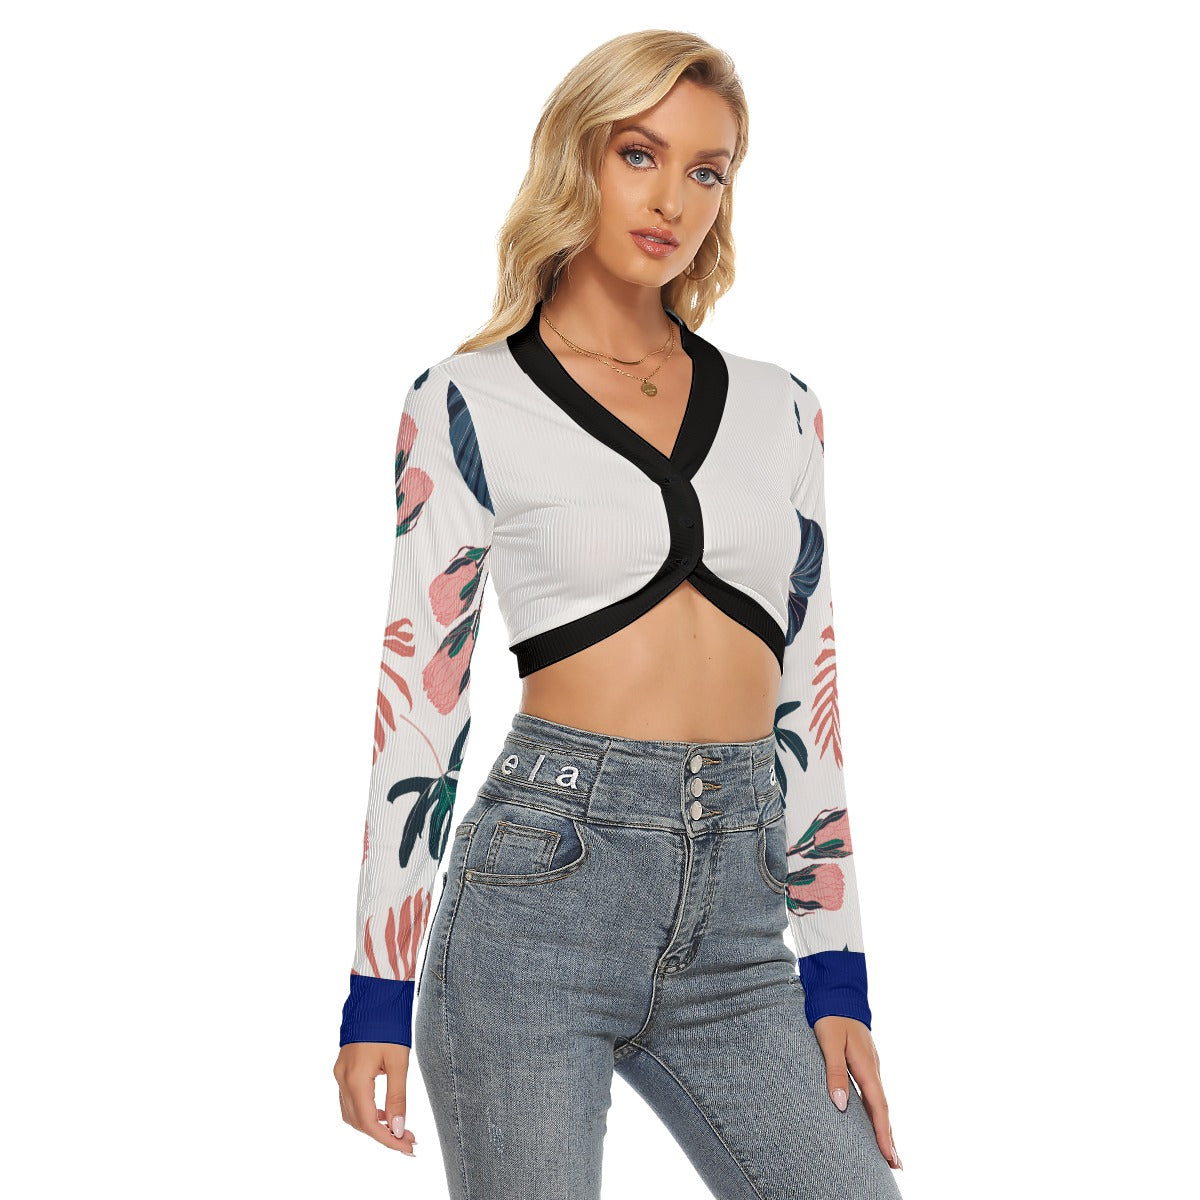 Xcarii Xii - Button Crop Top